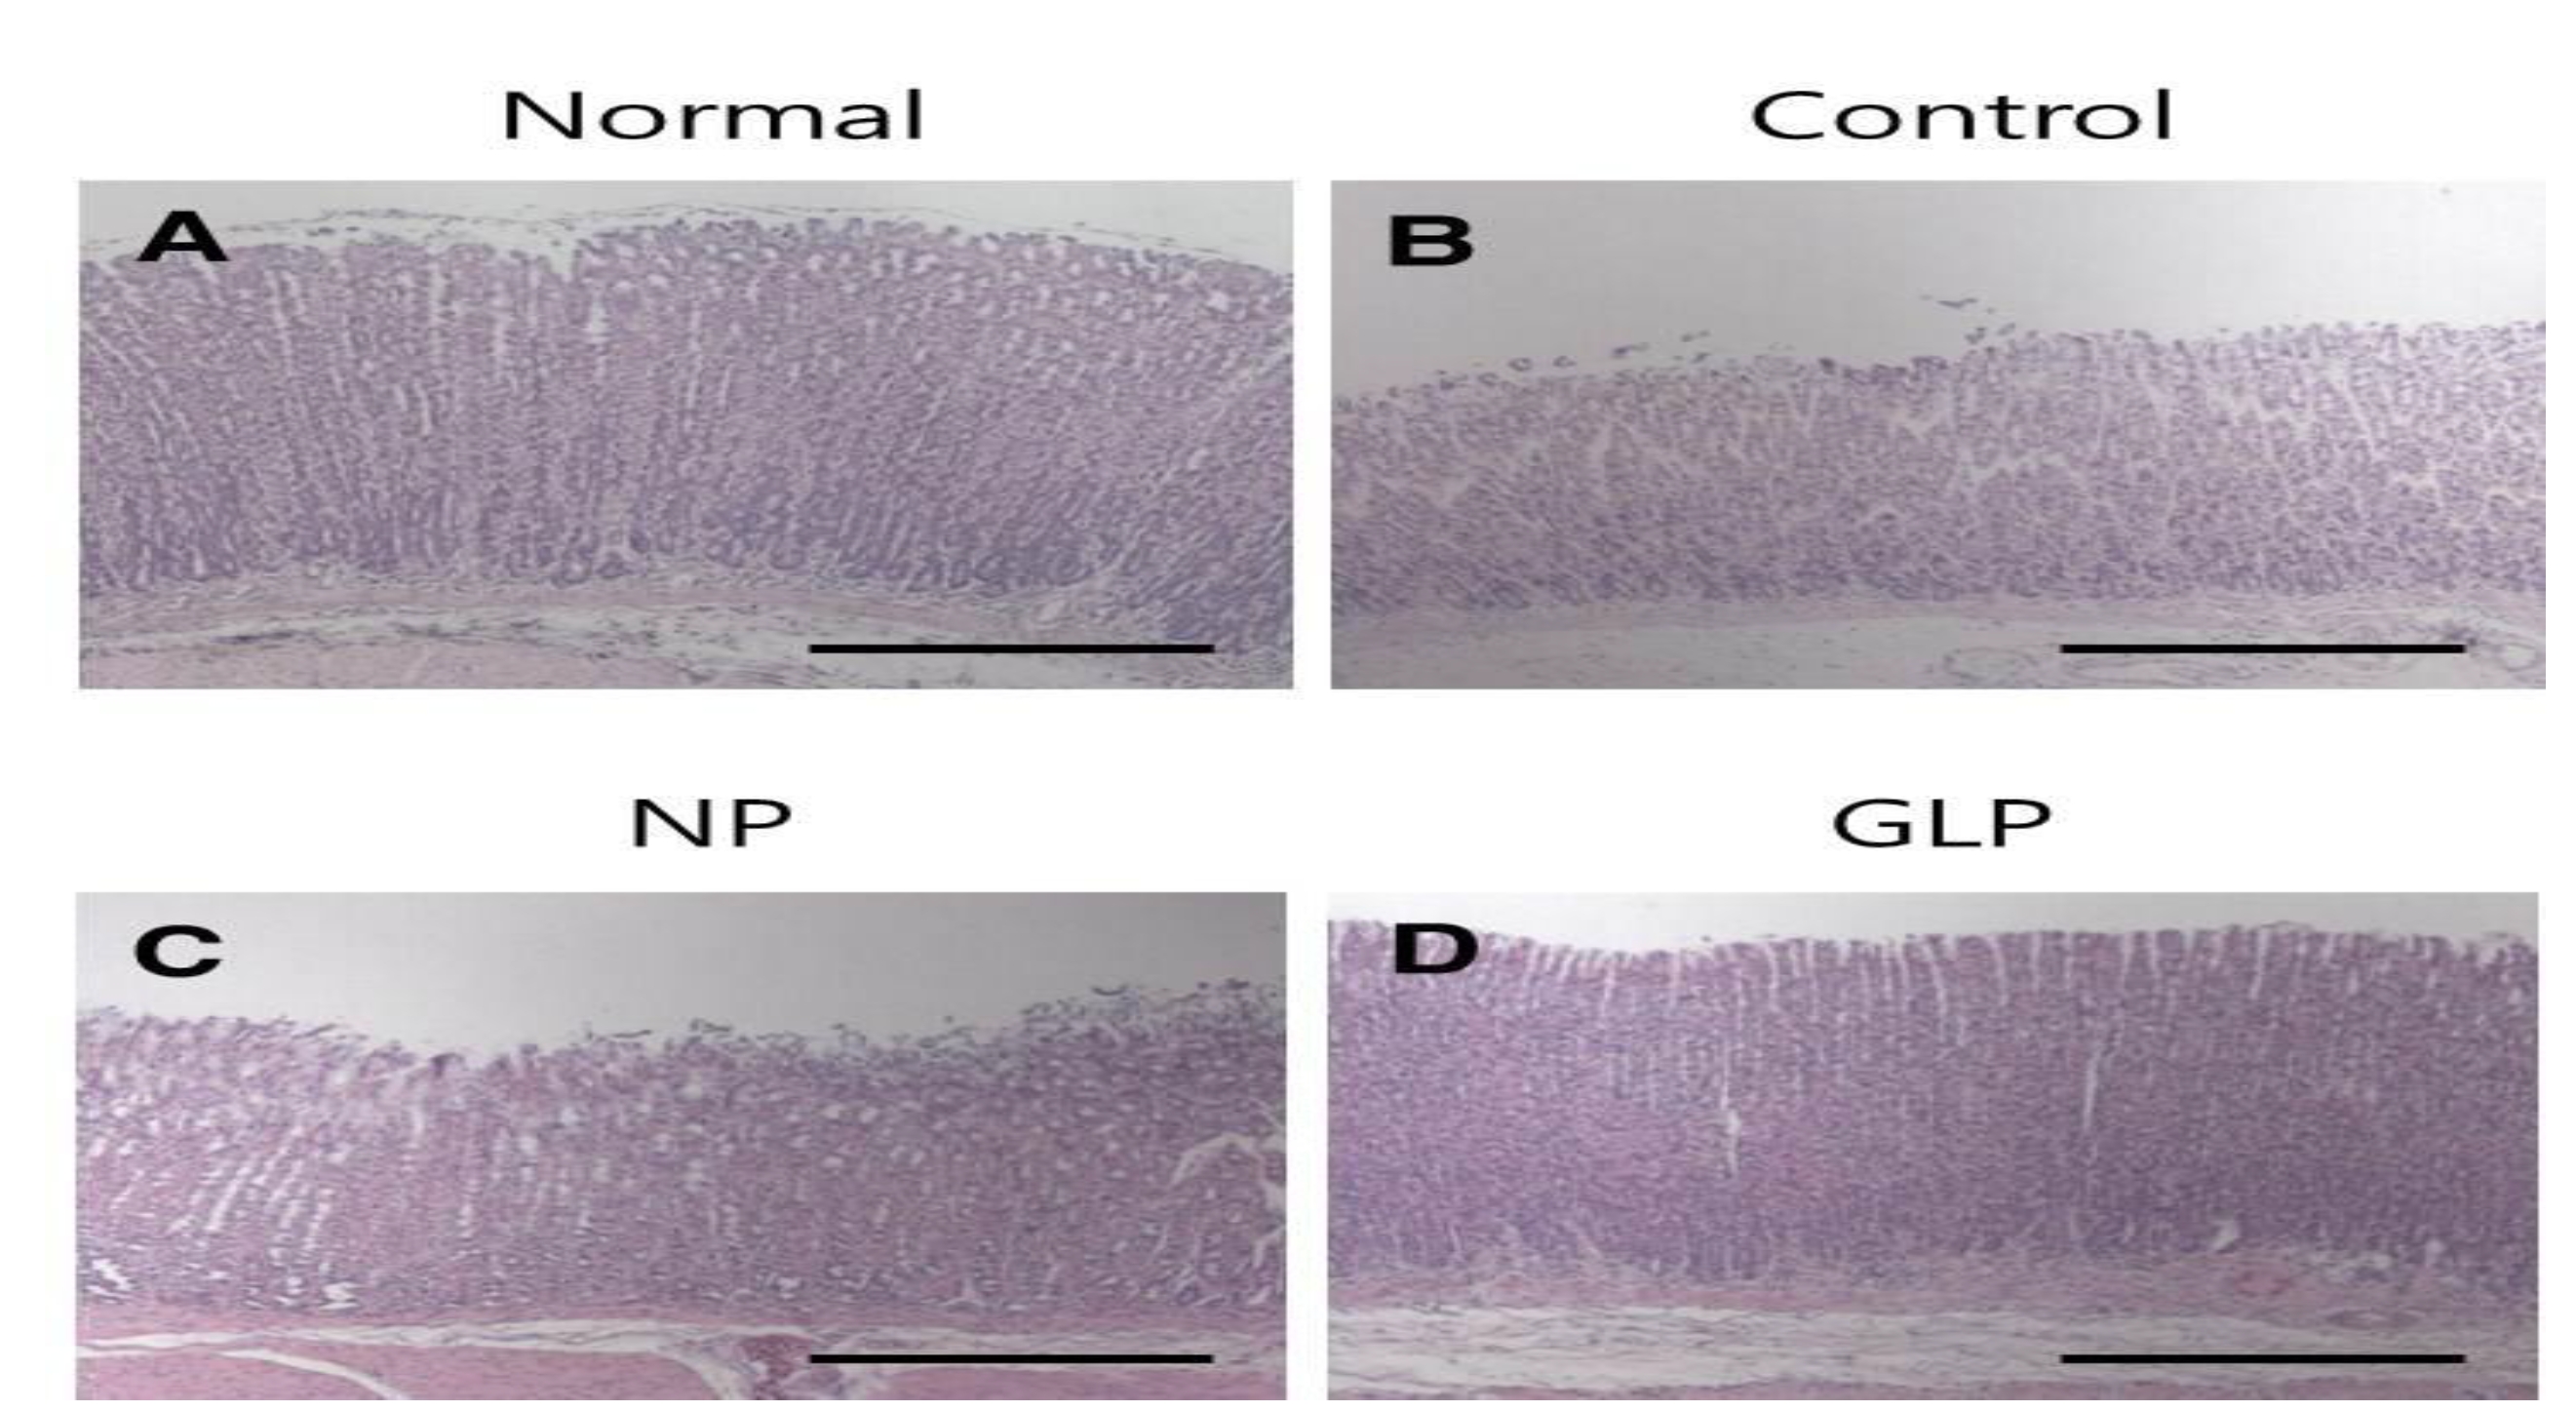 Light microscopic images of EtOH-induced chronic ulcers in rats.